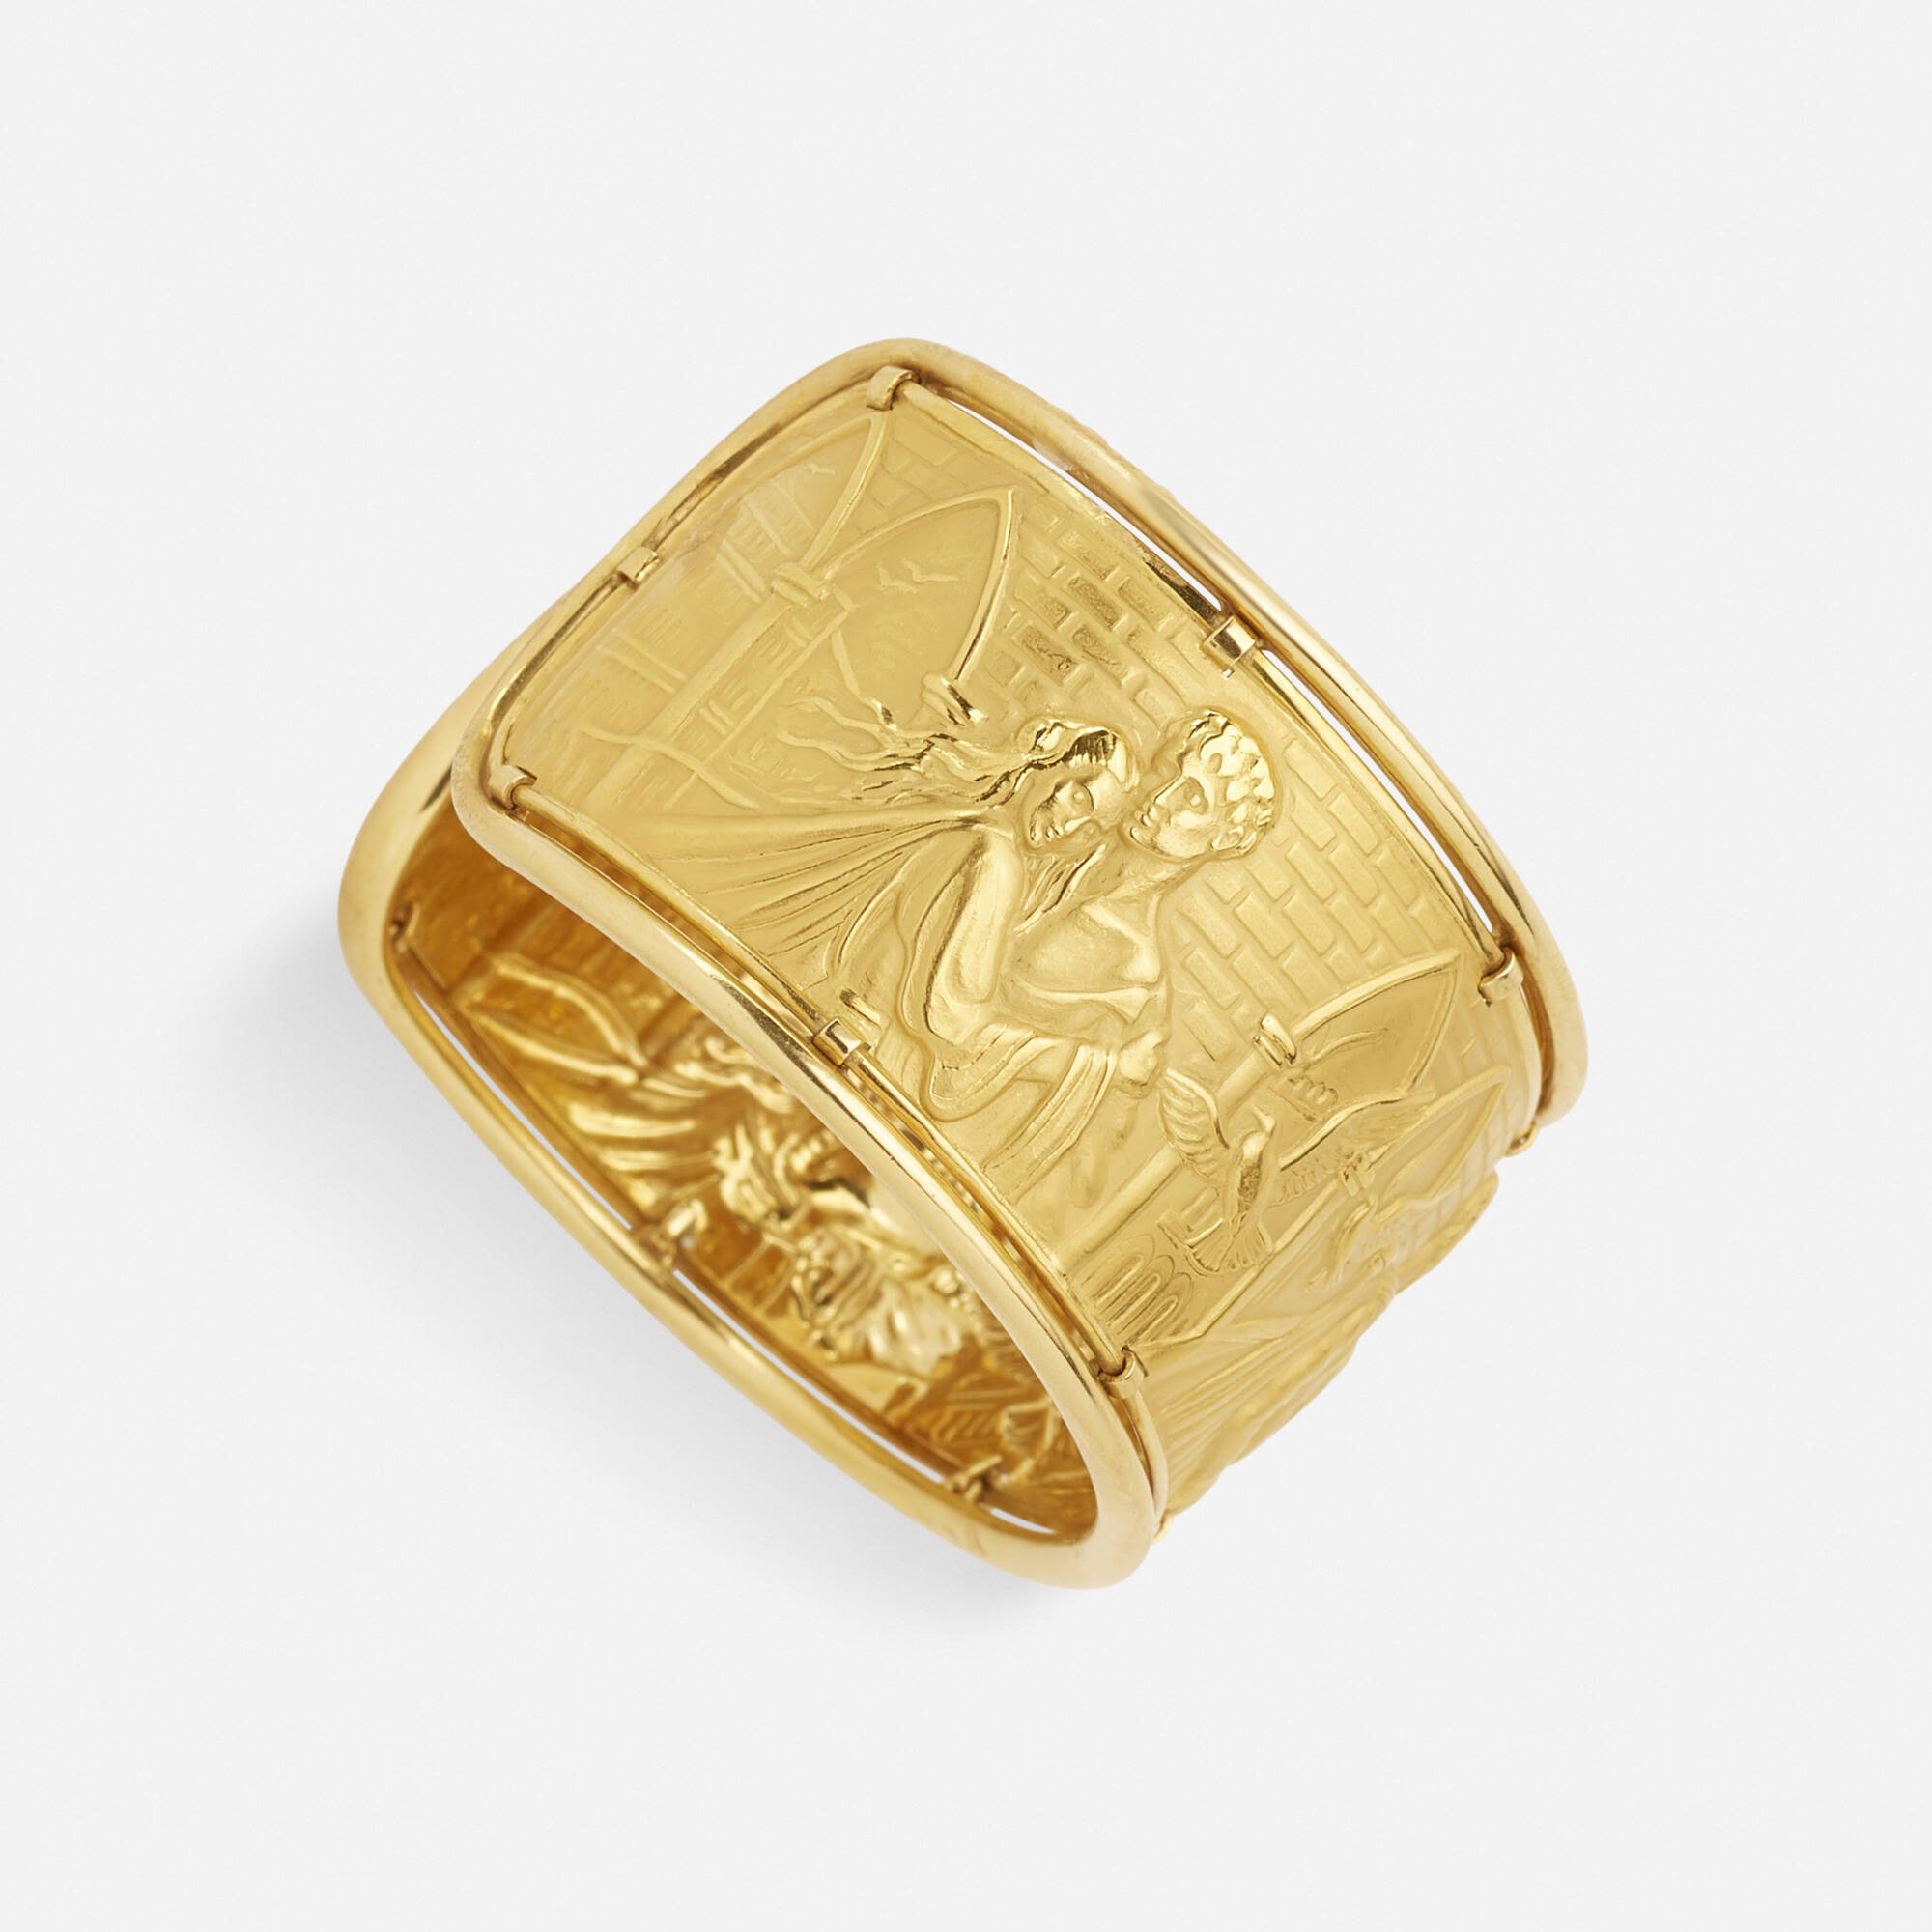 Lure Eller enten Intervenere 195: CARRERA Y CARRERA, Romeo and Juliet gold suite < Fall Jewelry &  Watches, 6 October 2020 < Auctions | Rago Auctions